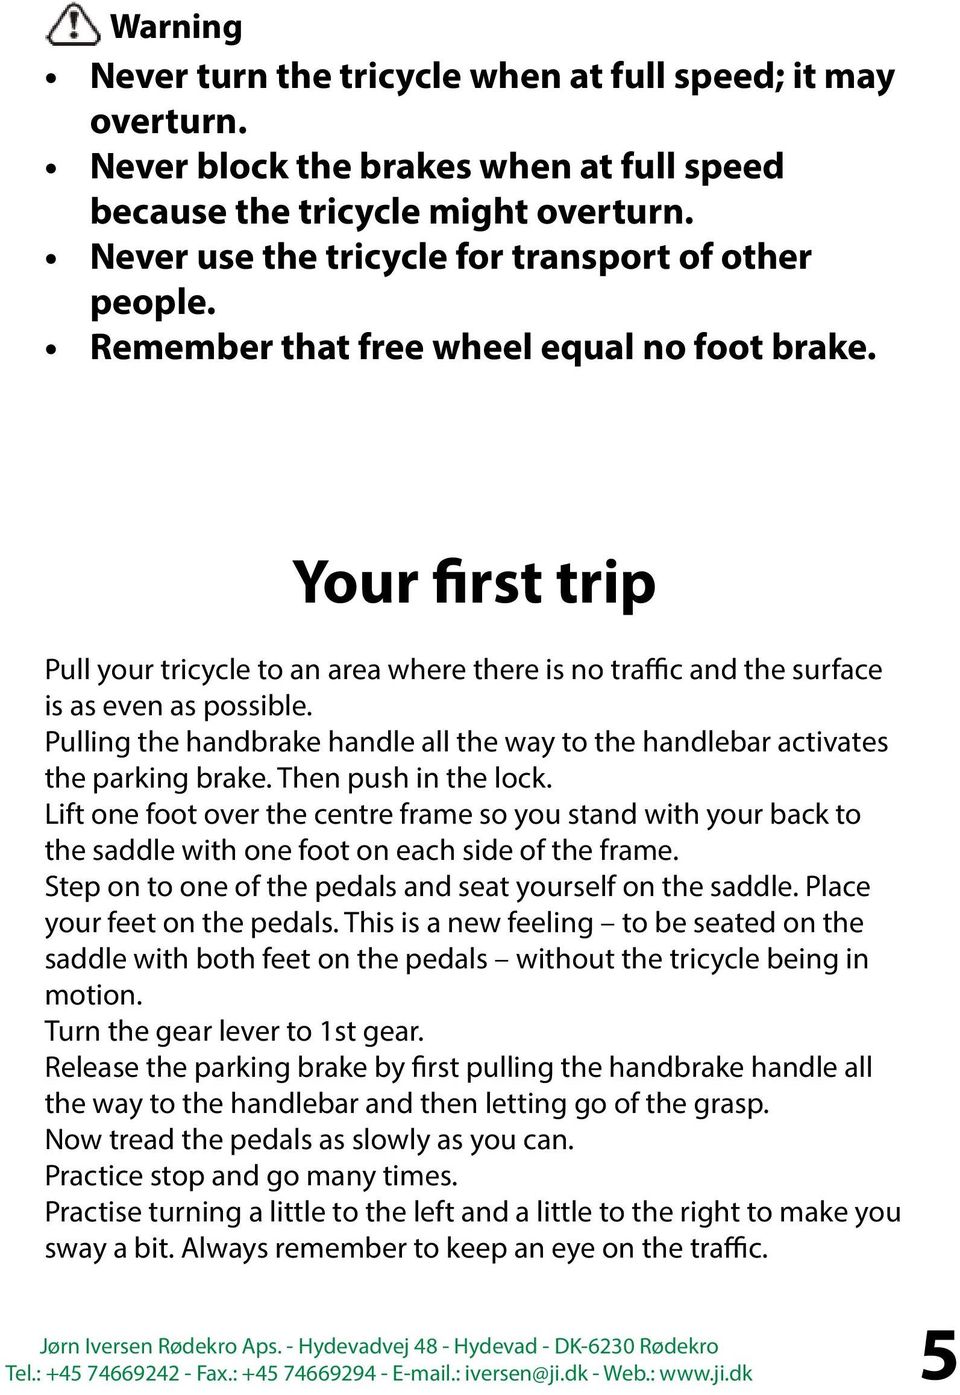 Your first trip Pull your tricycle to an area where there is no traffic and the surface is as even as possible. Pulling the handbrake handle all the way to the handlebar activates the parking brake.